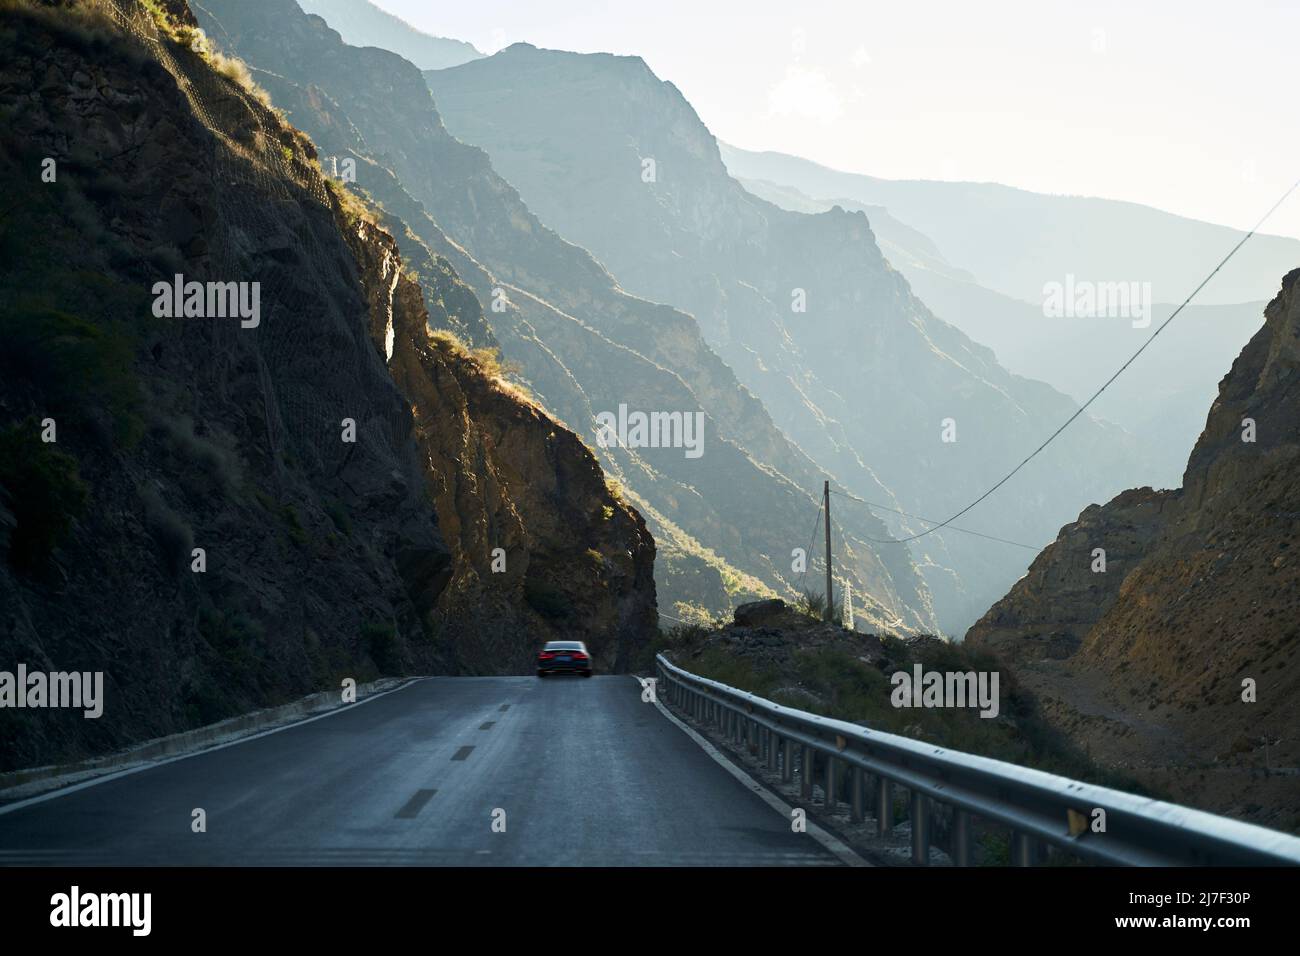 car running on highway through the rocky mountains in sichuan province, china Stock Photo